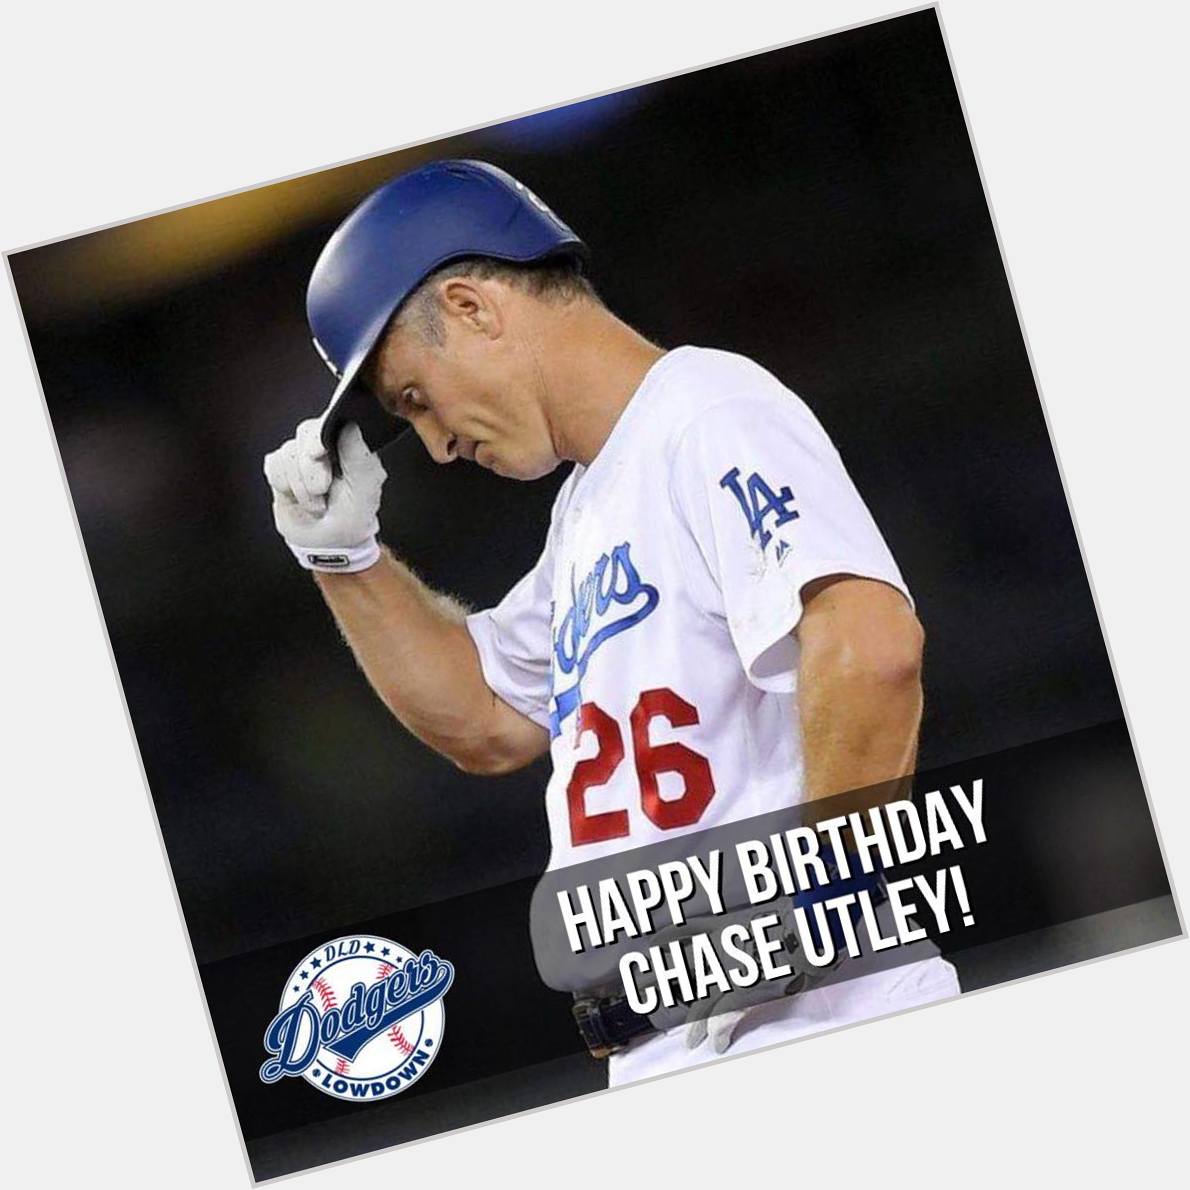 Join us in wishing The Silver Fox Chase Utley a very special happy birthday! Hope you have a great day Chase! 